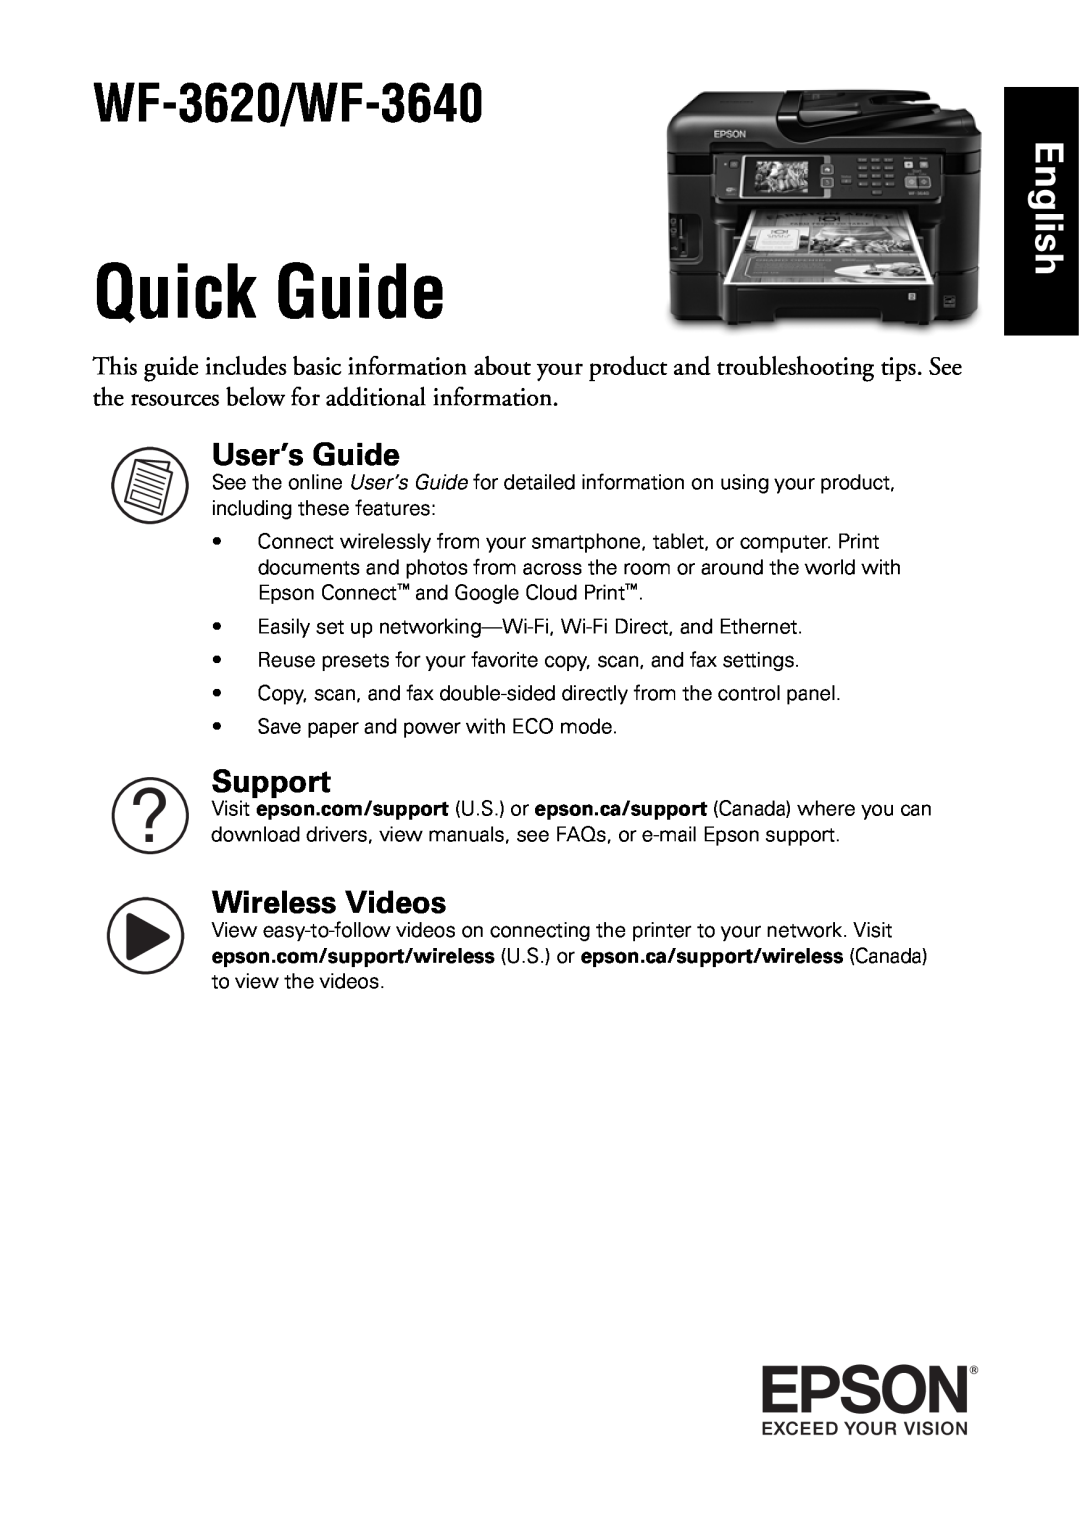 Epson manual Quick Guide, WF-3620/WF-3640, English, User’s Guide, Support, Wireless Videos 